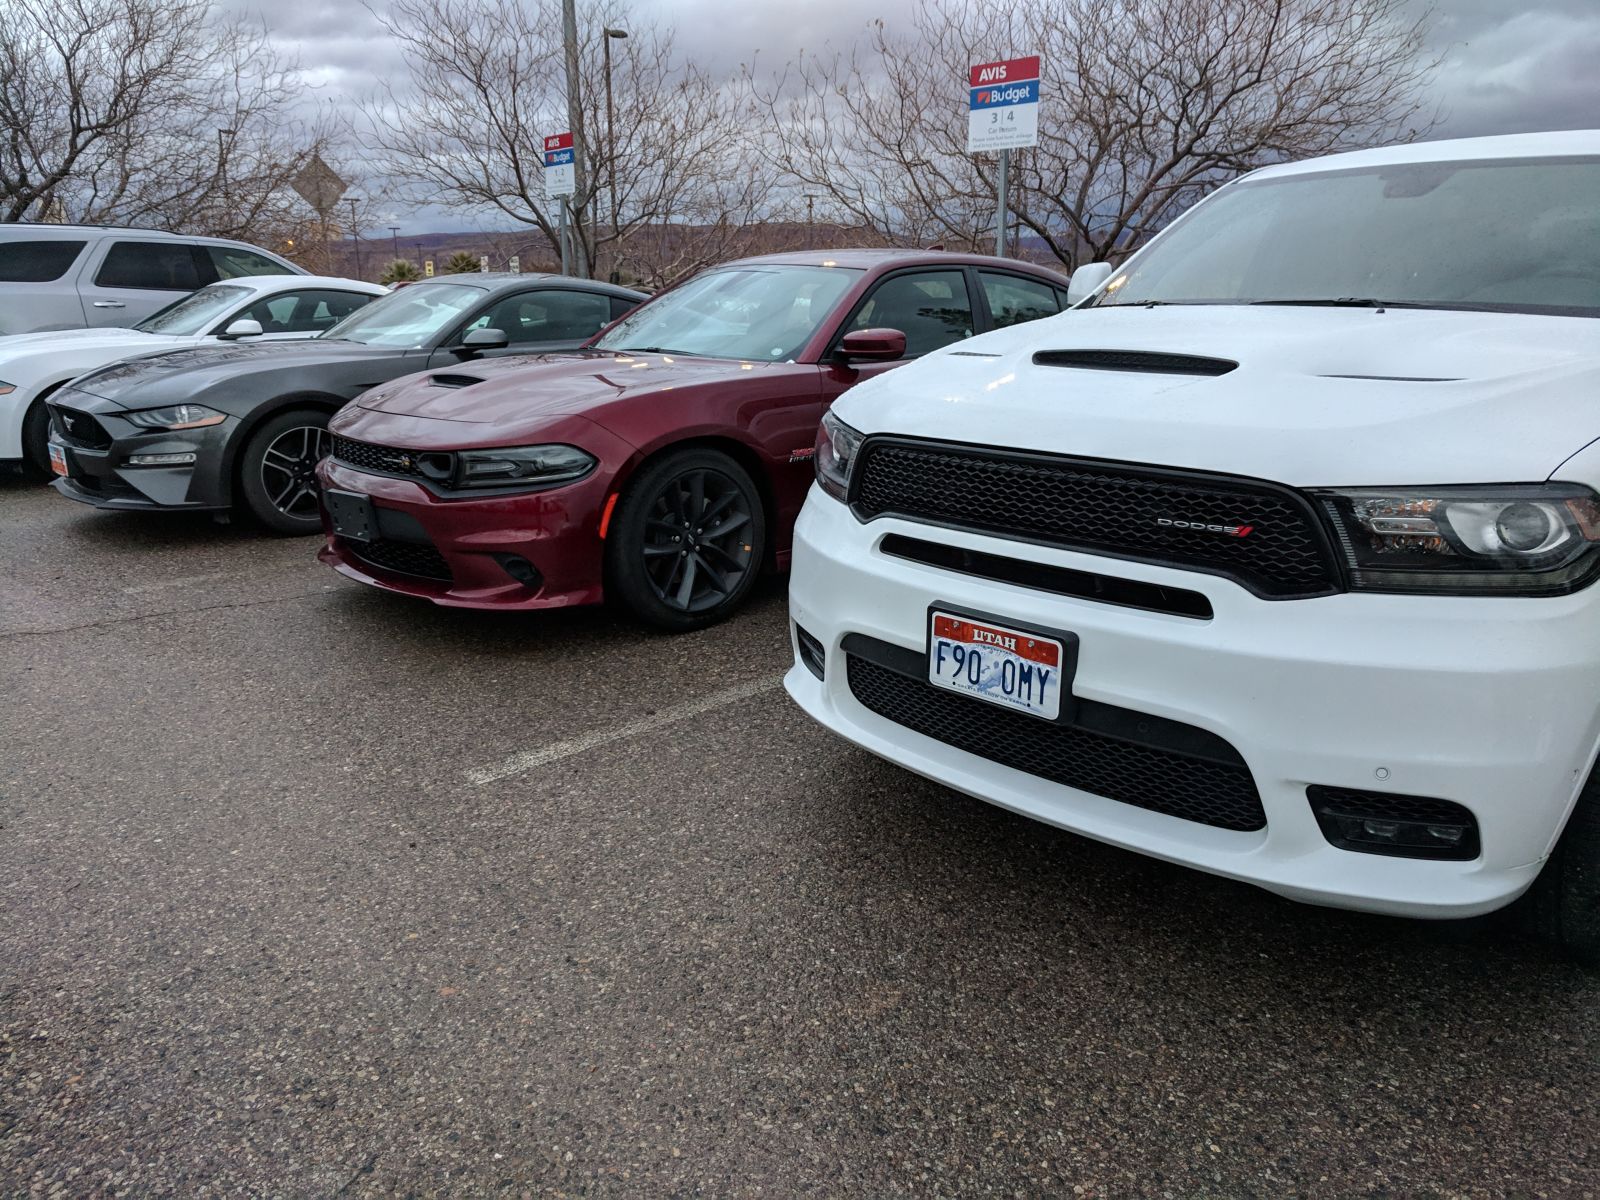 Durango R/T, another Scat Pack, and the GT I started in